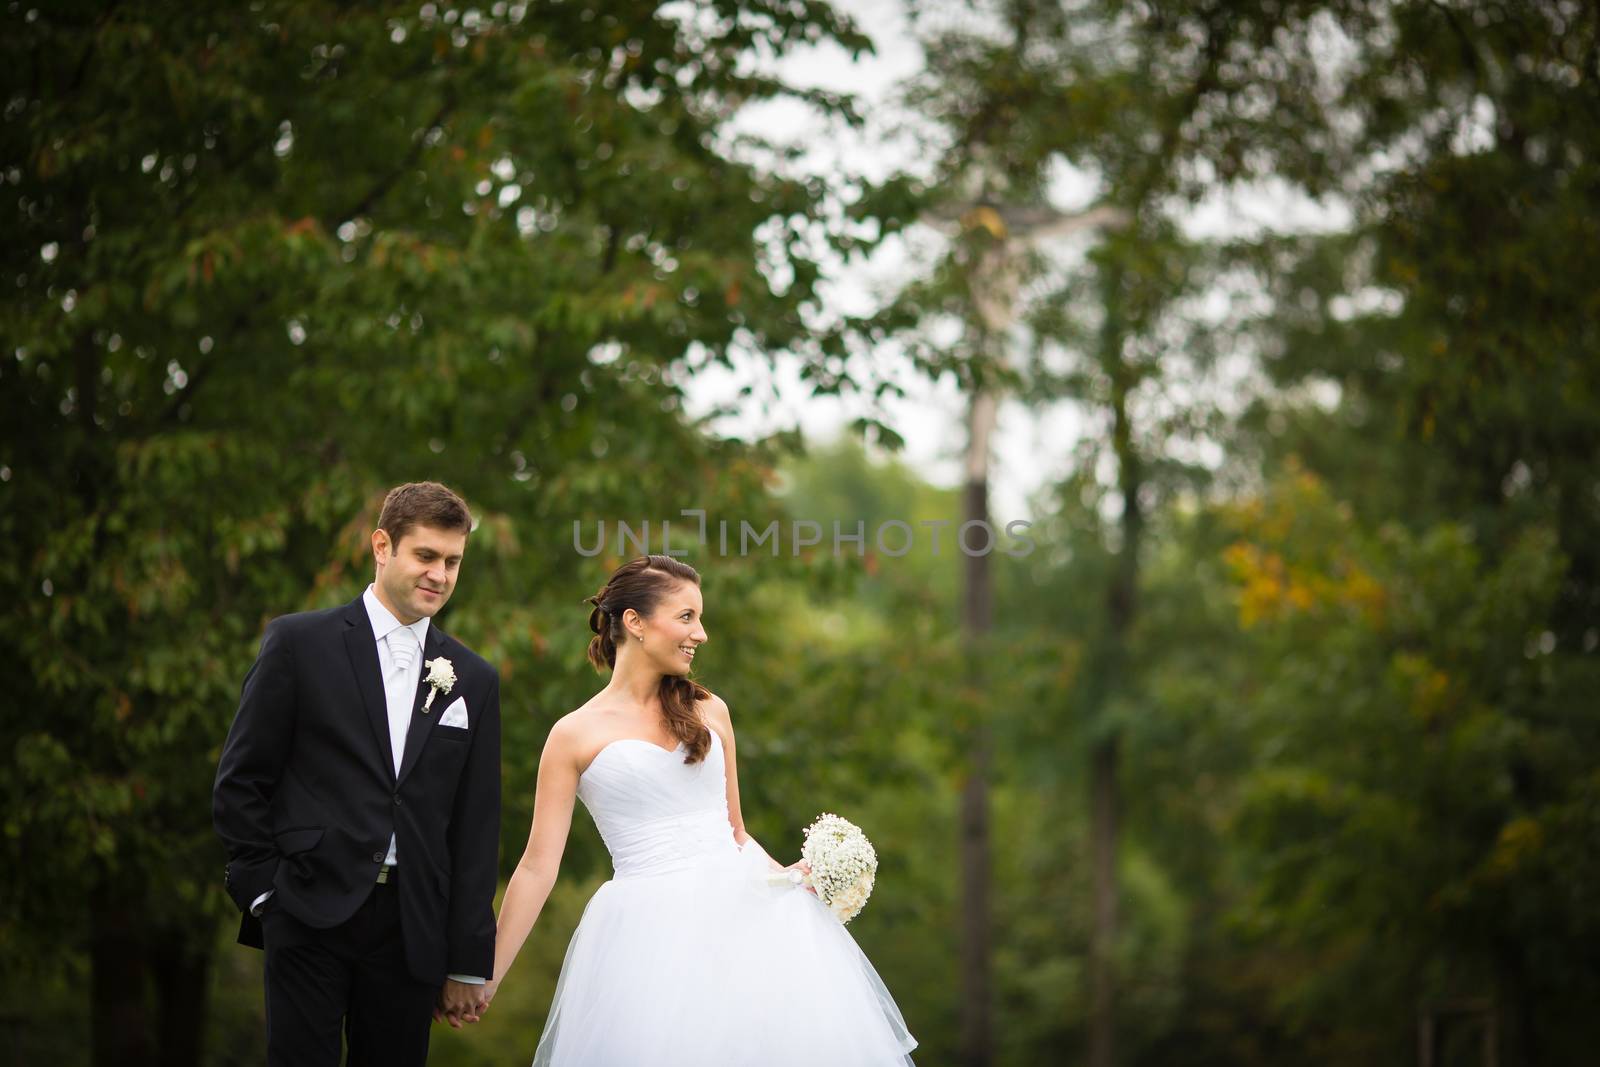 Just married, young wedding couple in a park, walking, savoring the moment on her big day (shallow DOF)